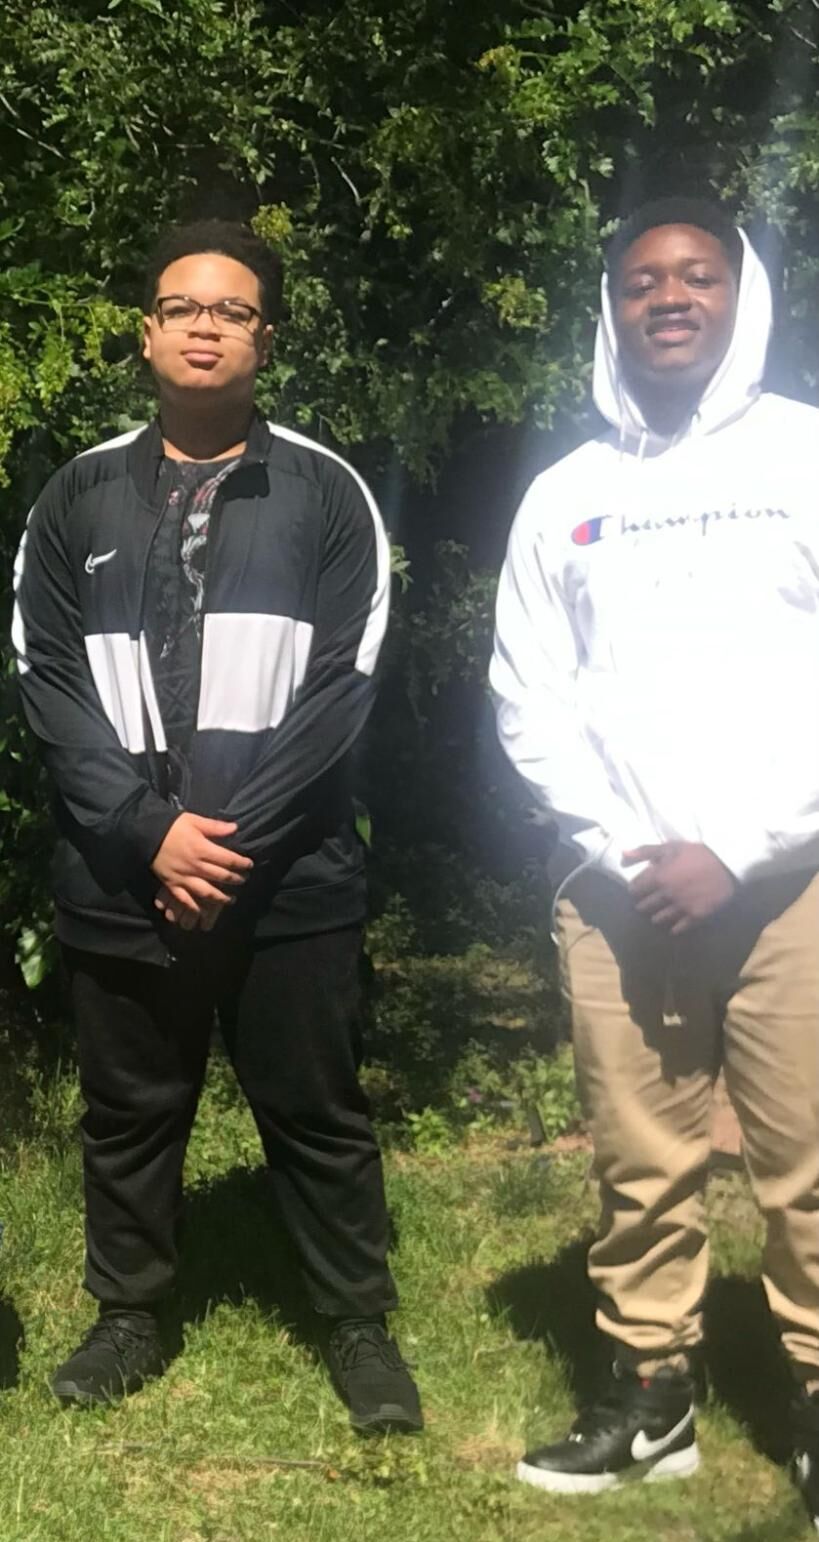 Two young Black high schoolers stand next to each other outside, both wearing jackets and slightly crossing their arms in front of their pelvis. This is a more recent photo of Deandre and Walter.